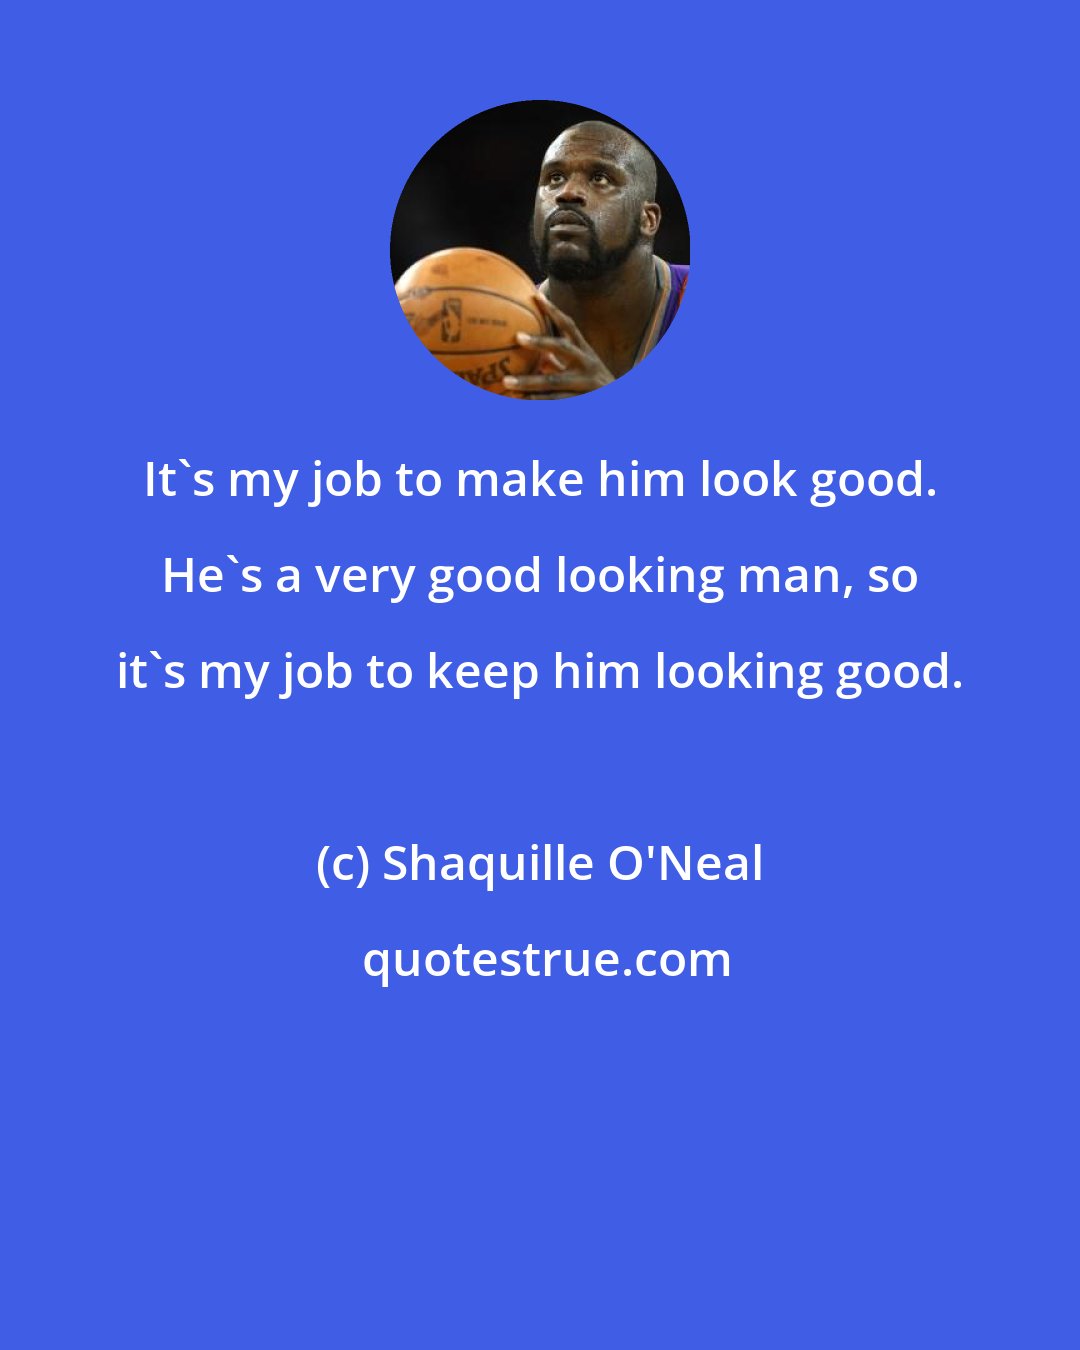 Shaquille O'Neal: It's my job to make him look good. He's a very good looking man, so it's my job to keep him looking good.